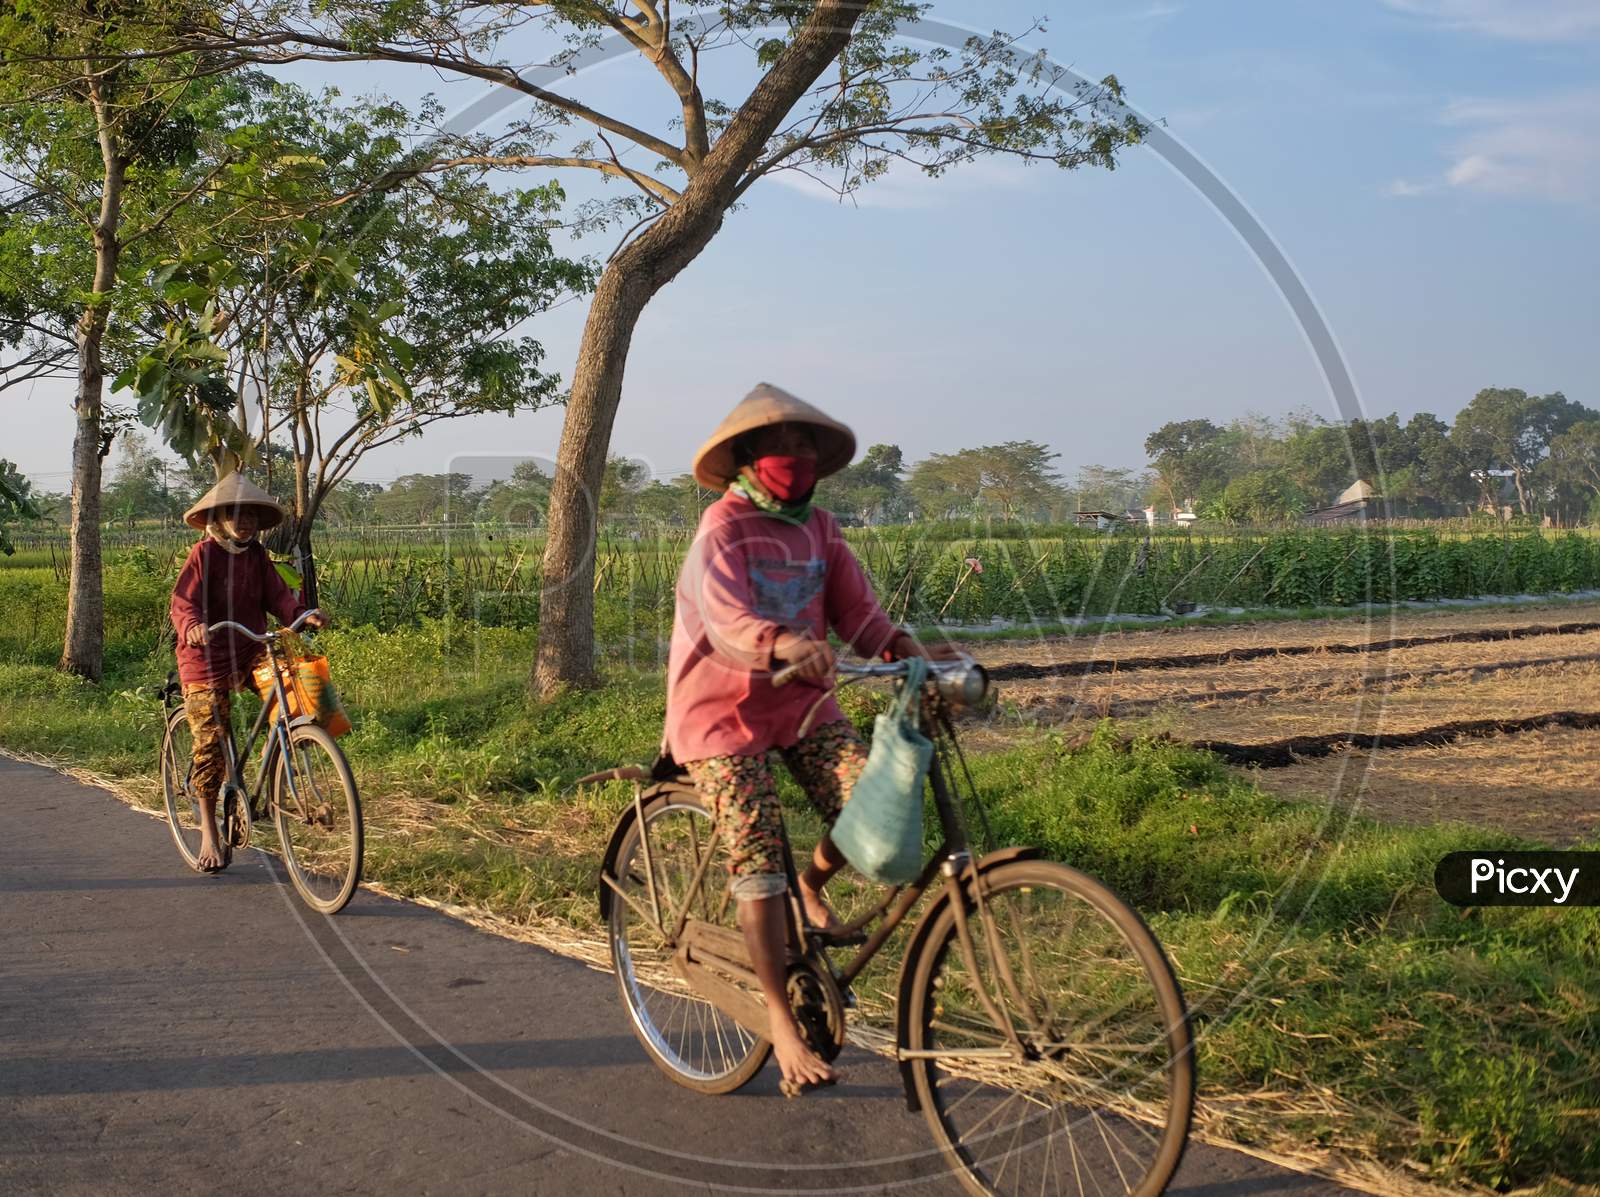 Farmers ride antique bicycles on village roads